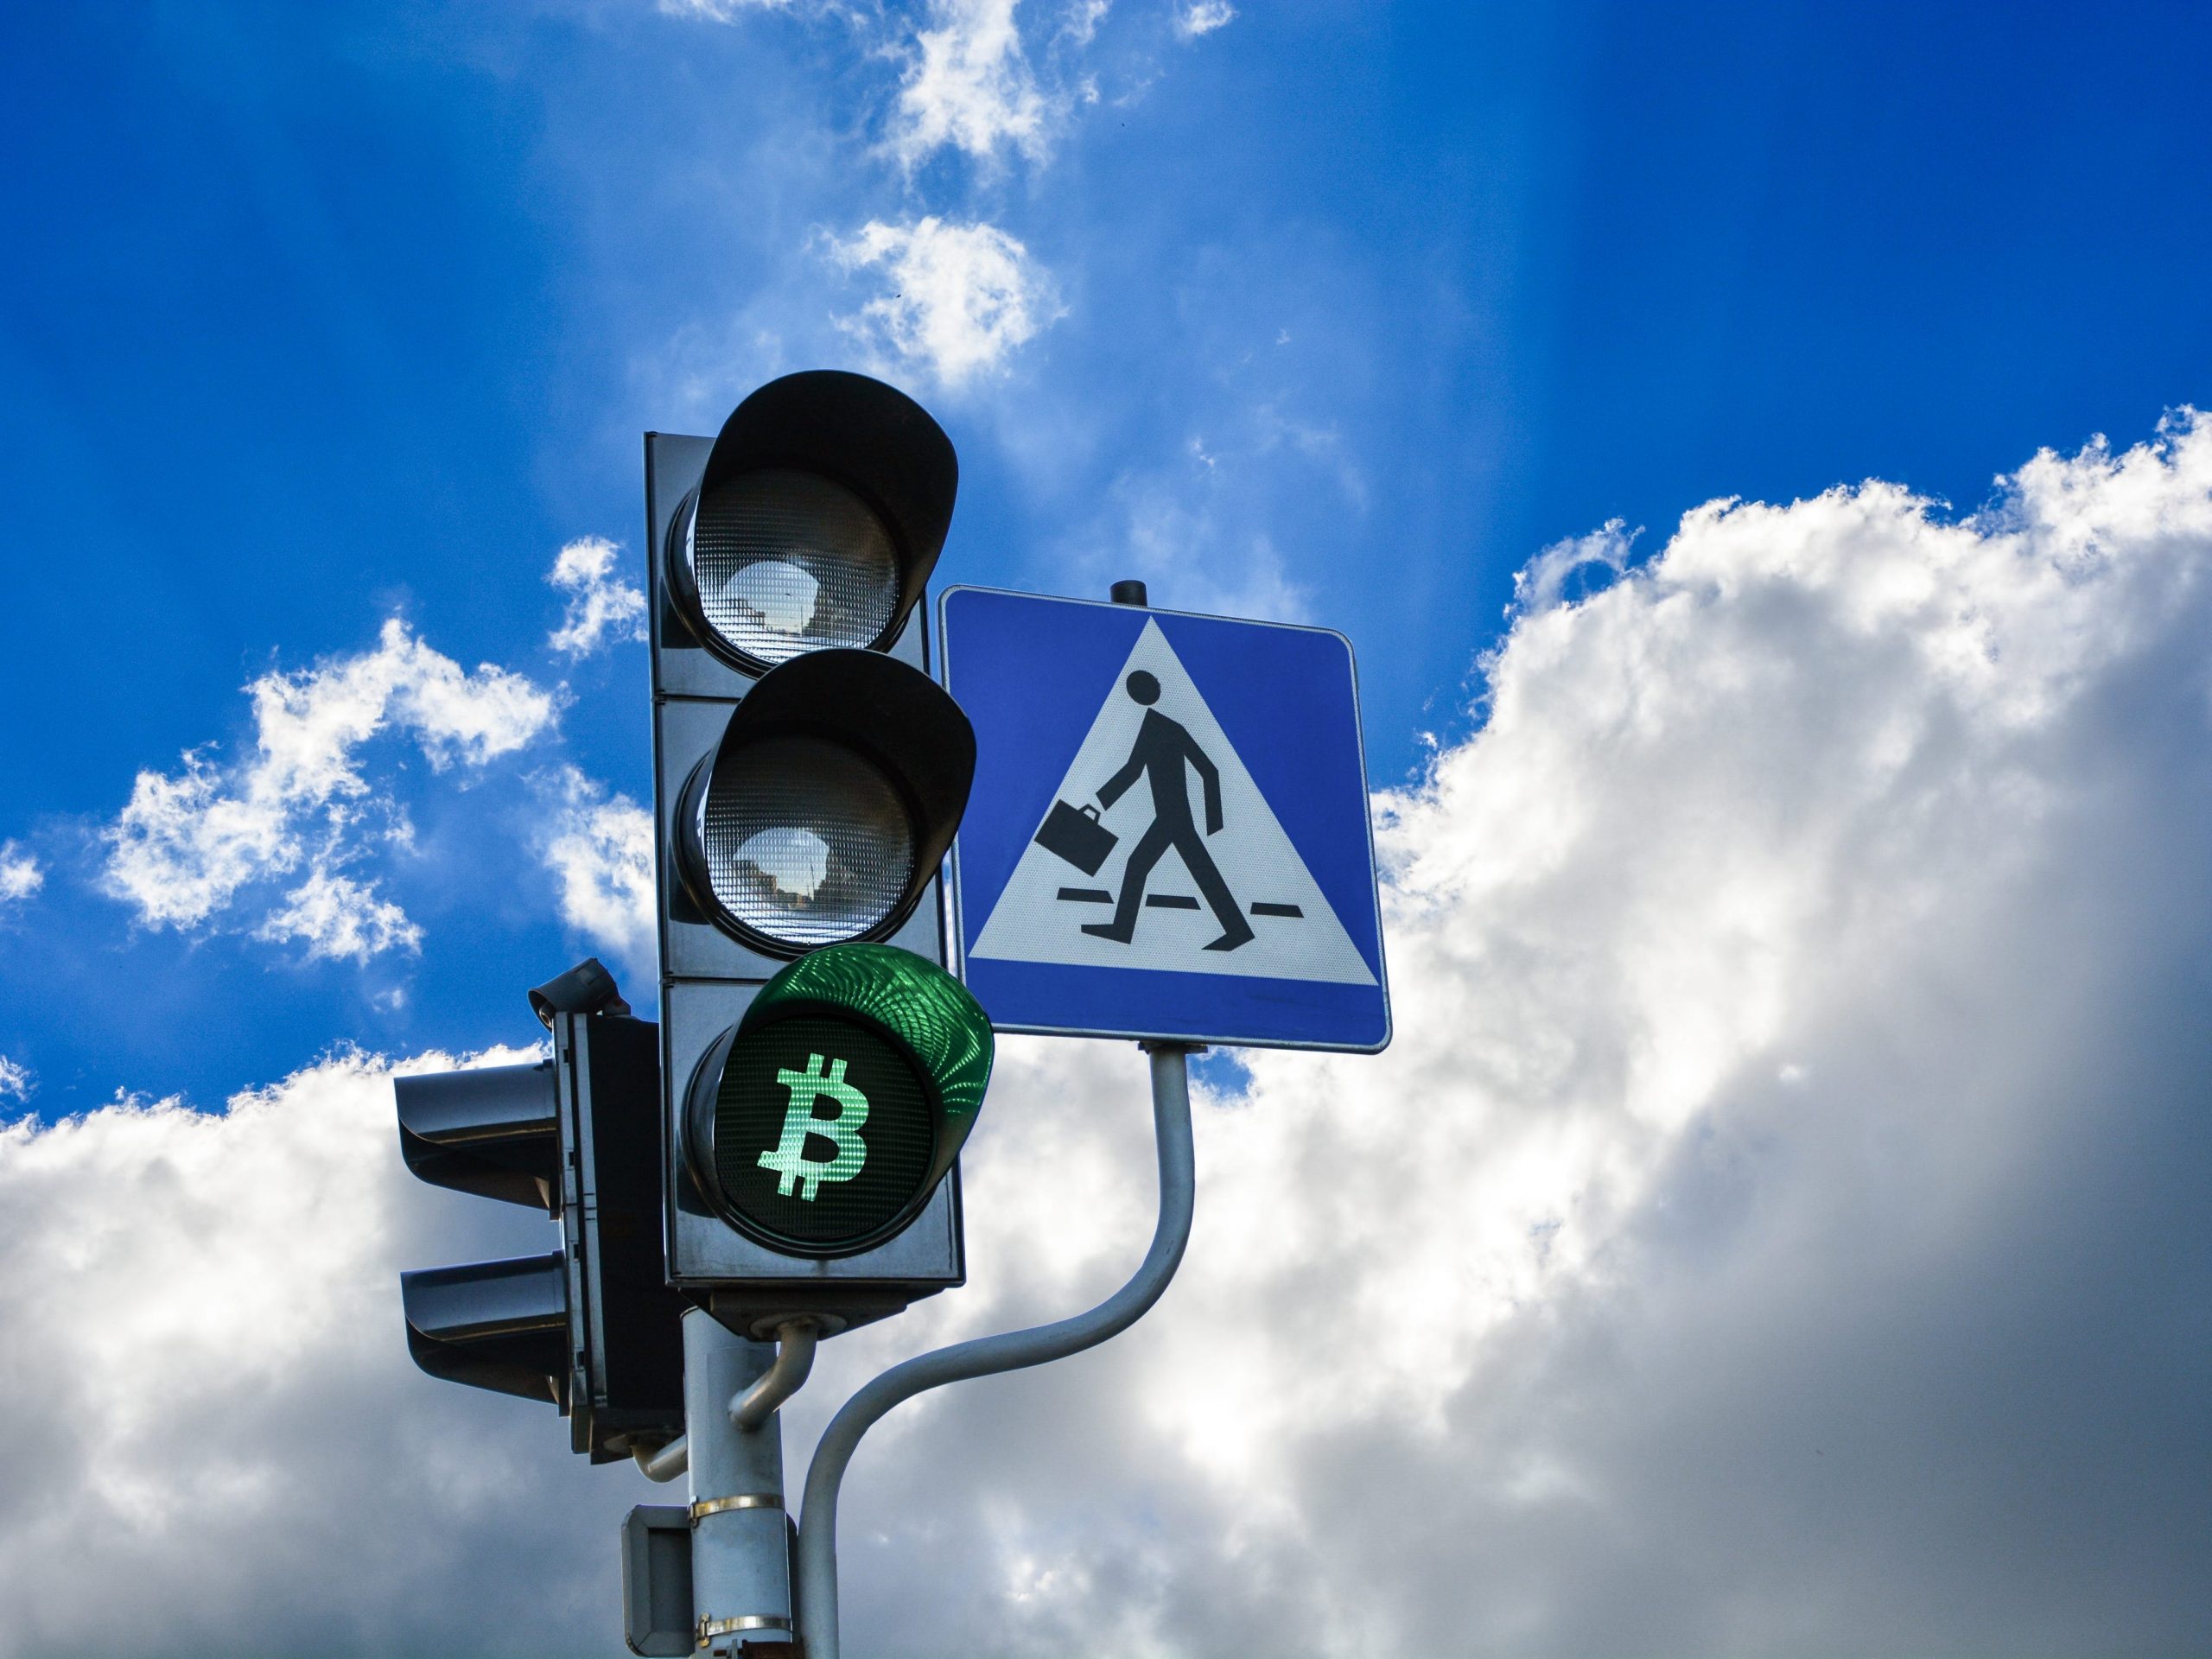 Traffic lights with green light replaced by bitcoin sign, clouds and light blue sky in the background